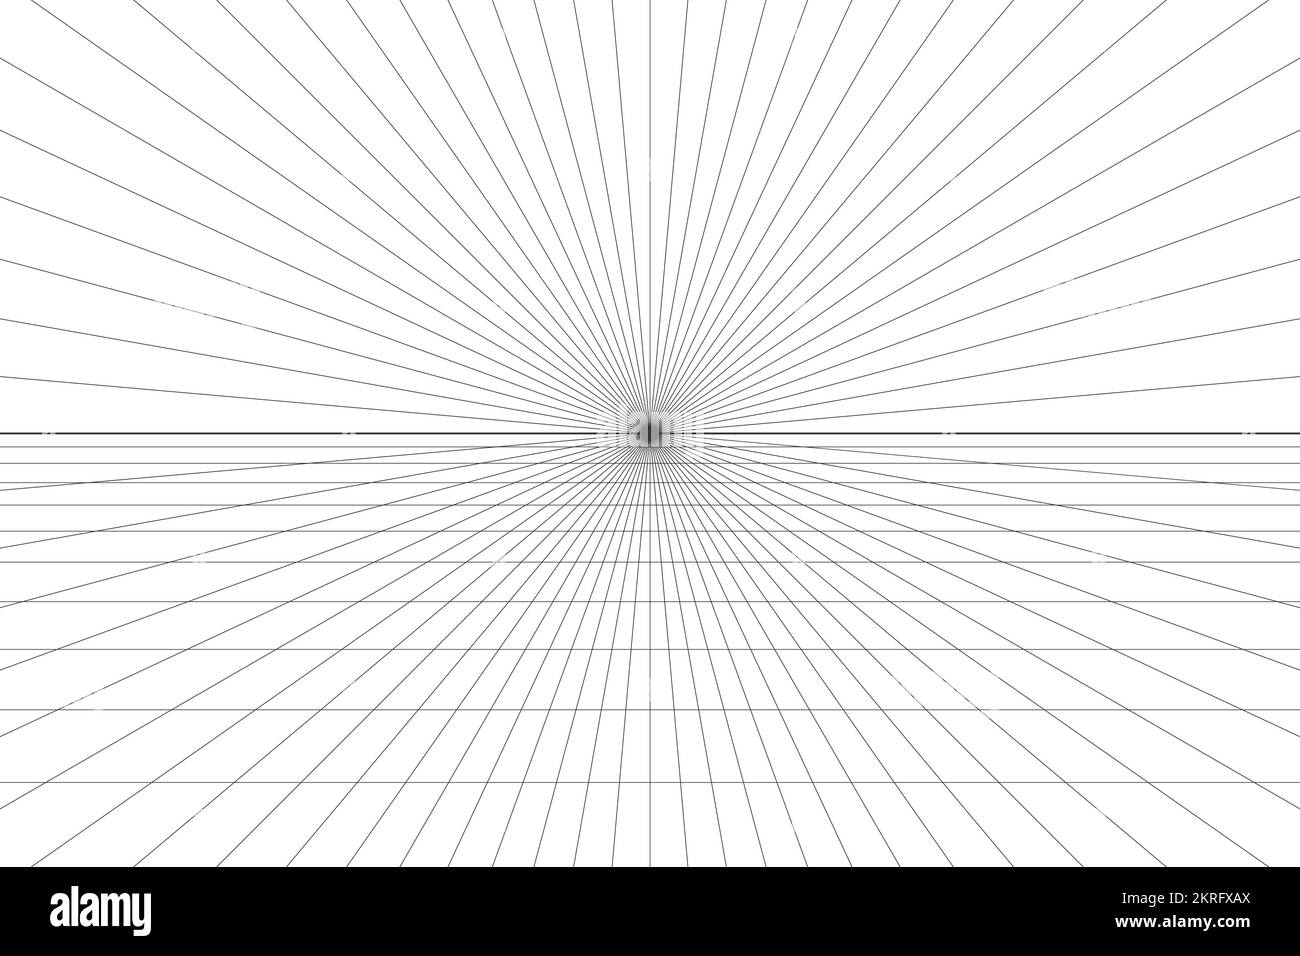 One point perspective grid background. Abstract grid line backdrop. Drawing perspective mesh template. Vector illustration isolated on white Stock Vector